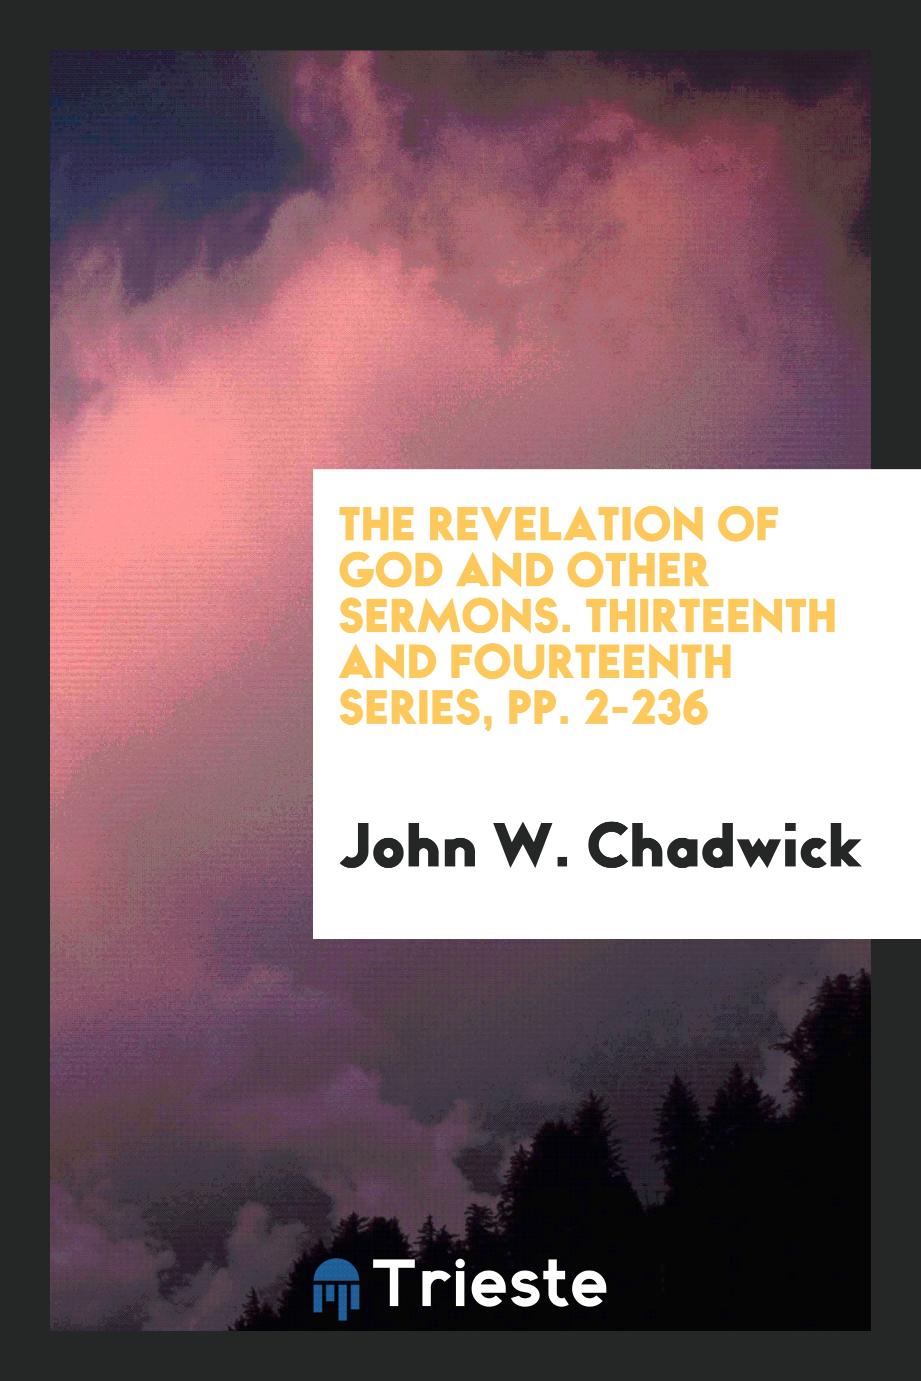 The Revelation of God and Other Sermons. Thirteenth and Fourteenth Series, pp. 2-236